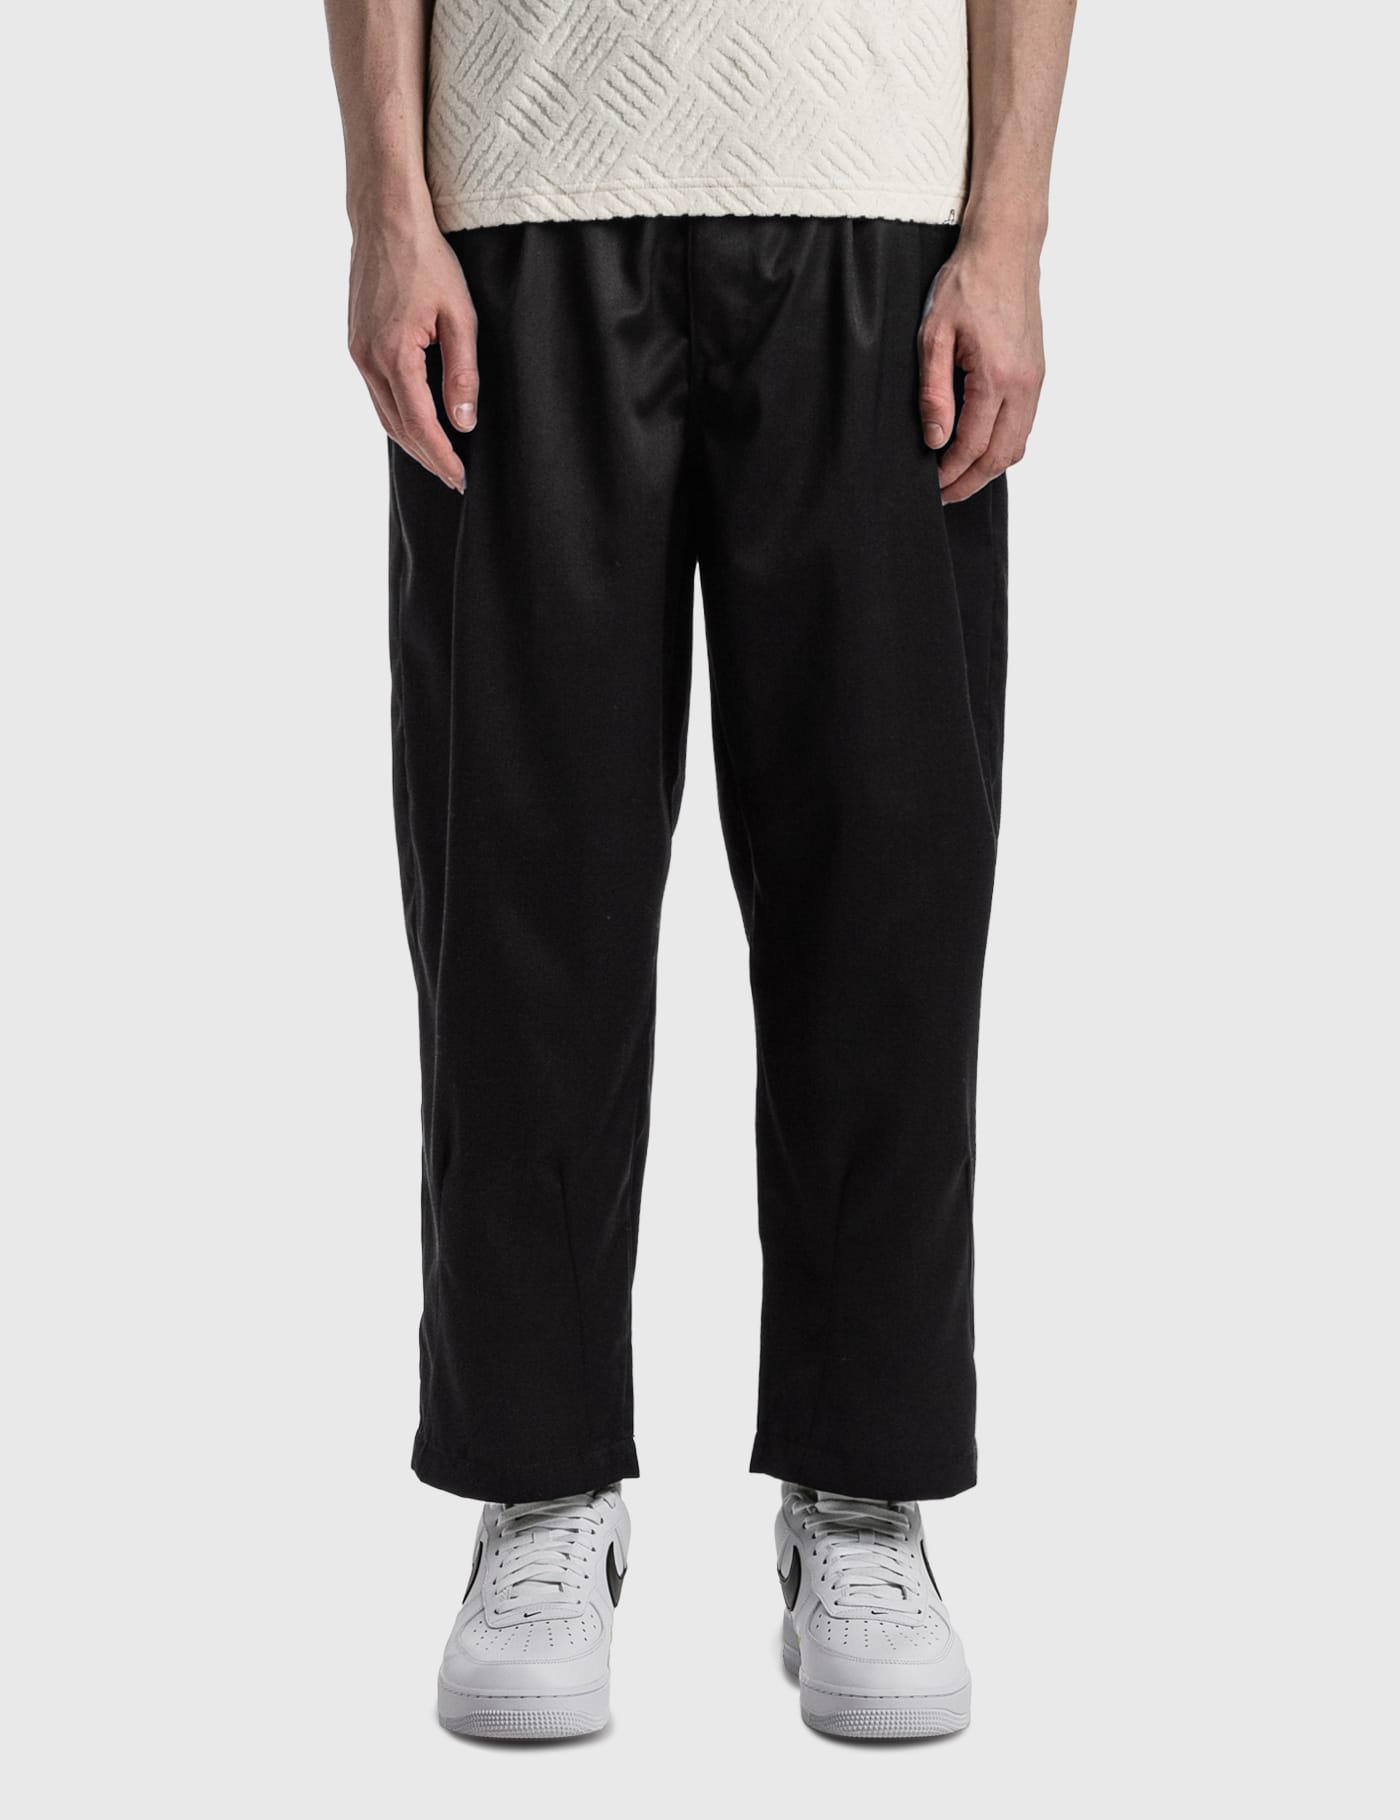 TIGHTBOOTH - BAGGY SLACKS | HBX - Globally Curated Fashion and 